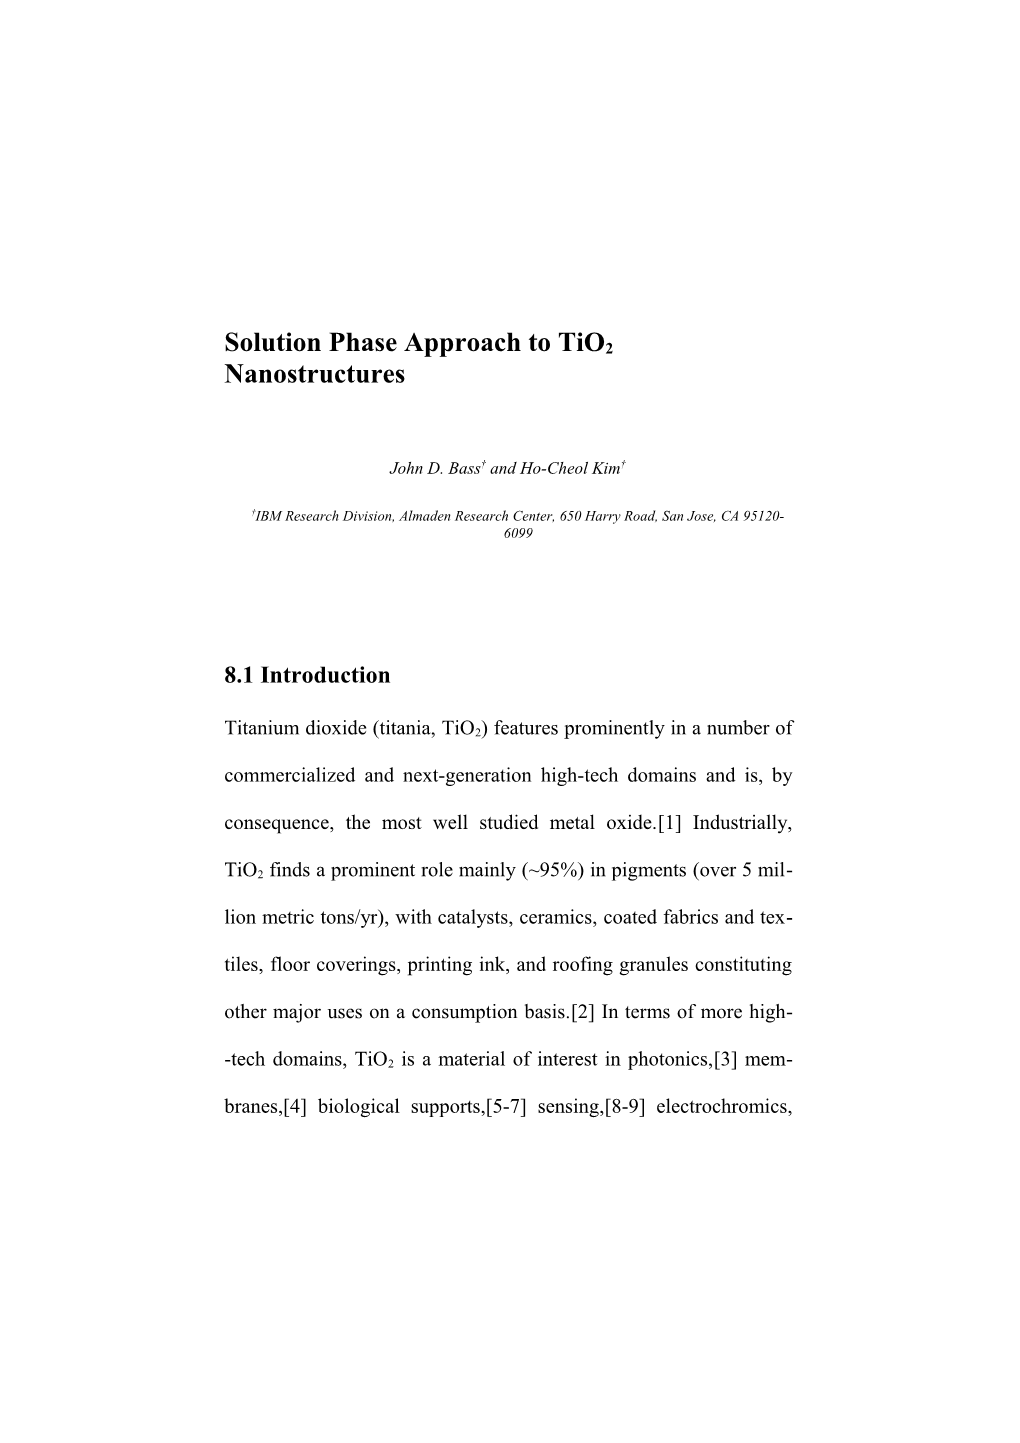 Solution Phase Approach to Tio2 Nanostructures